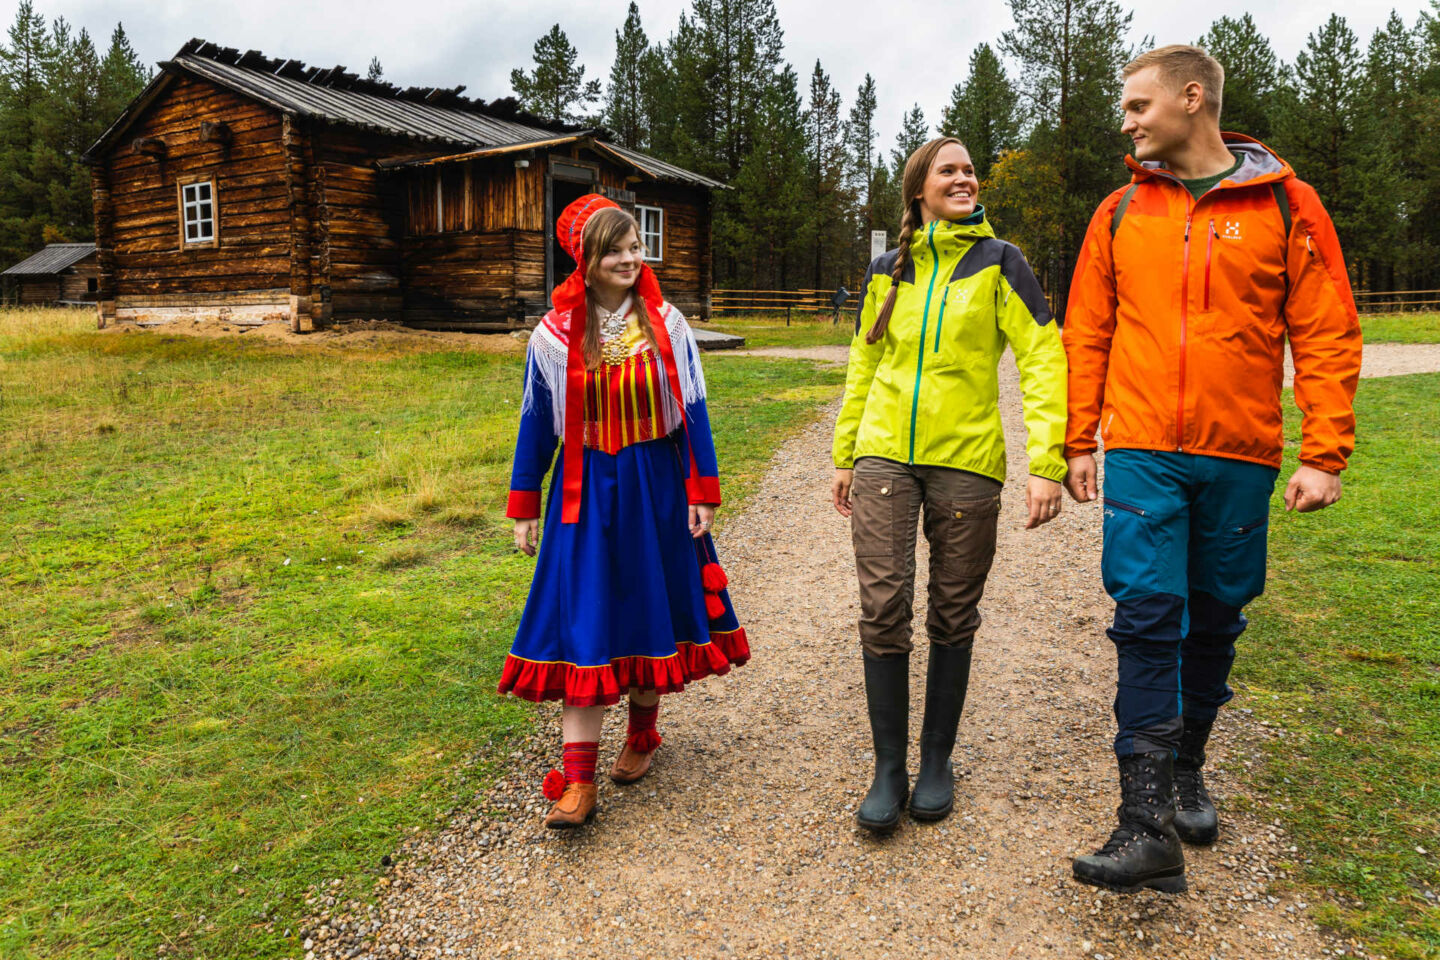 A Sámi guide at the Siida museum in northern Lapland